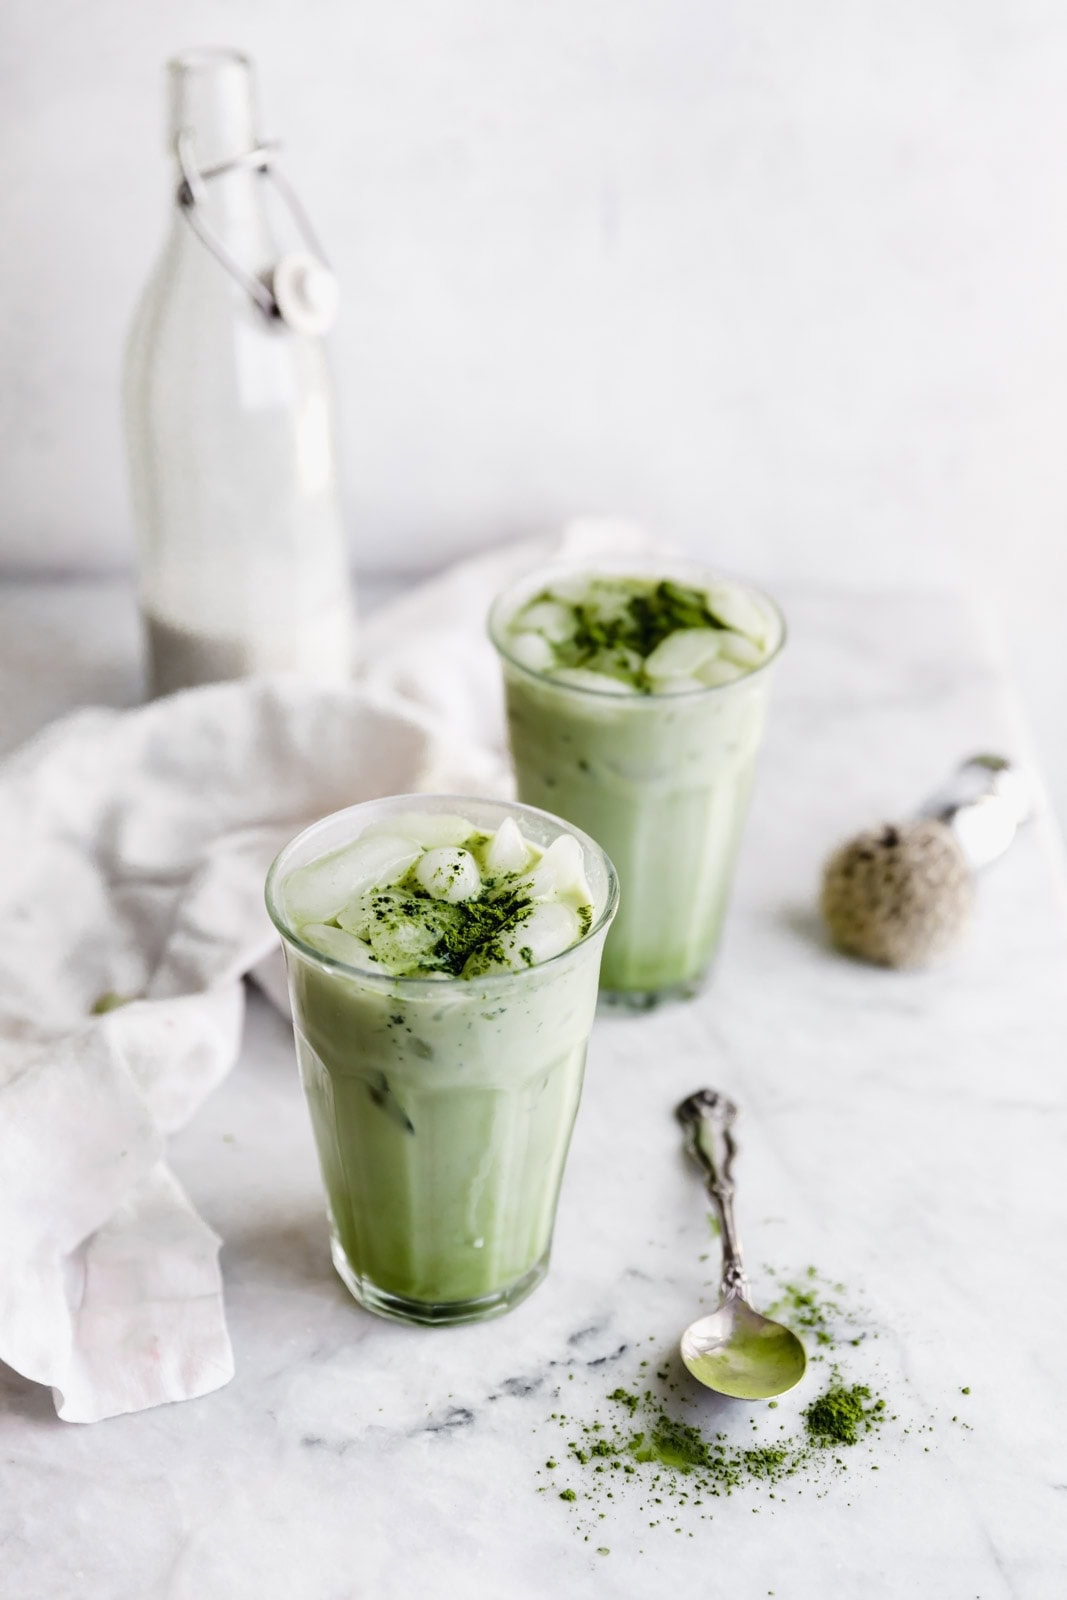 These insta-worthy White Chocolate Matcha Iced Lattes are the perfect afternoon pick-me-up. Power through the rest of the day with this sweet, green, caffeinated treat.